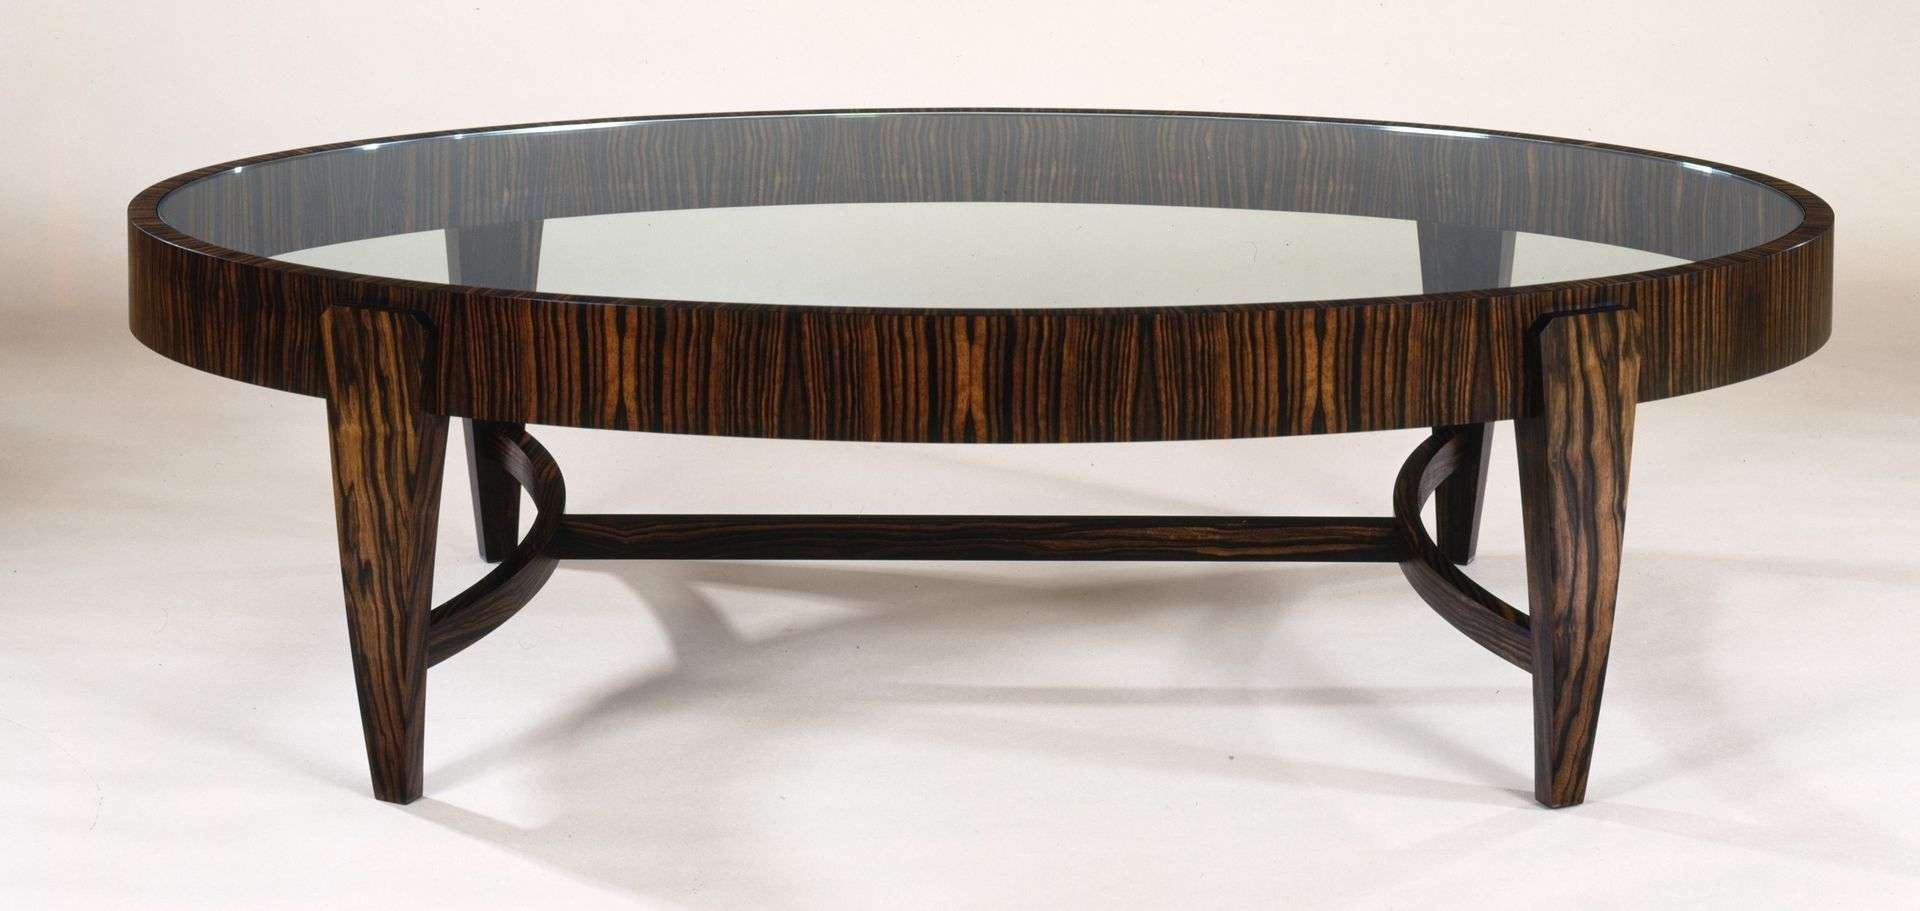 Gorgeous Oval Glass Coffee Table As Contemporary Furniture – Ruchi Inside Most Current Oval Wooden Coffee Tables (View 14 of 20)